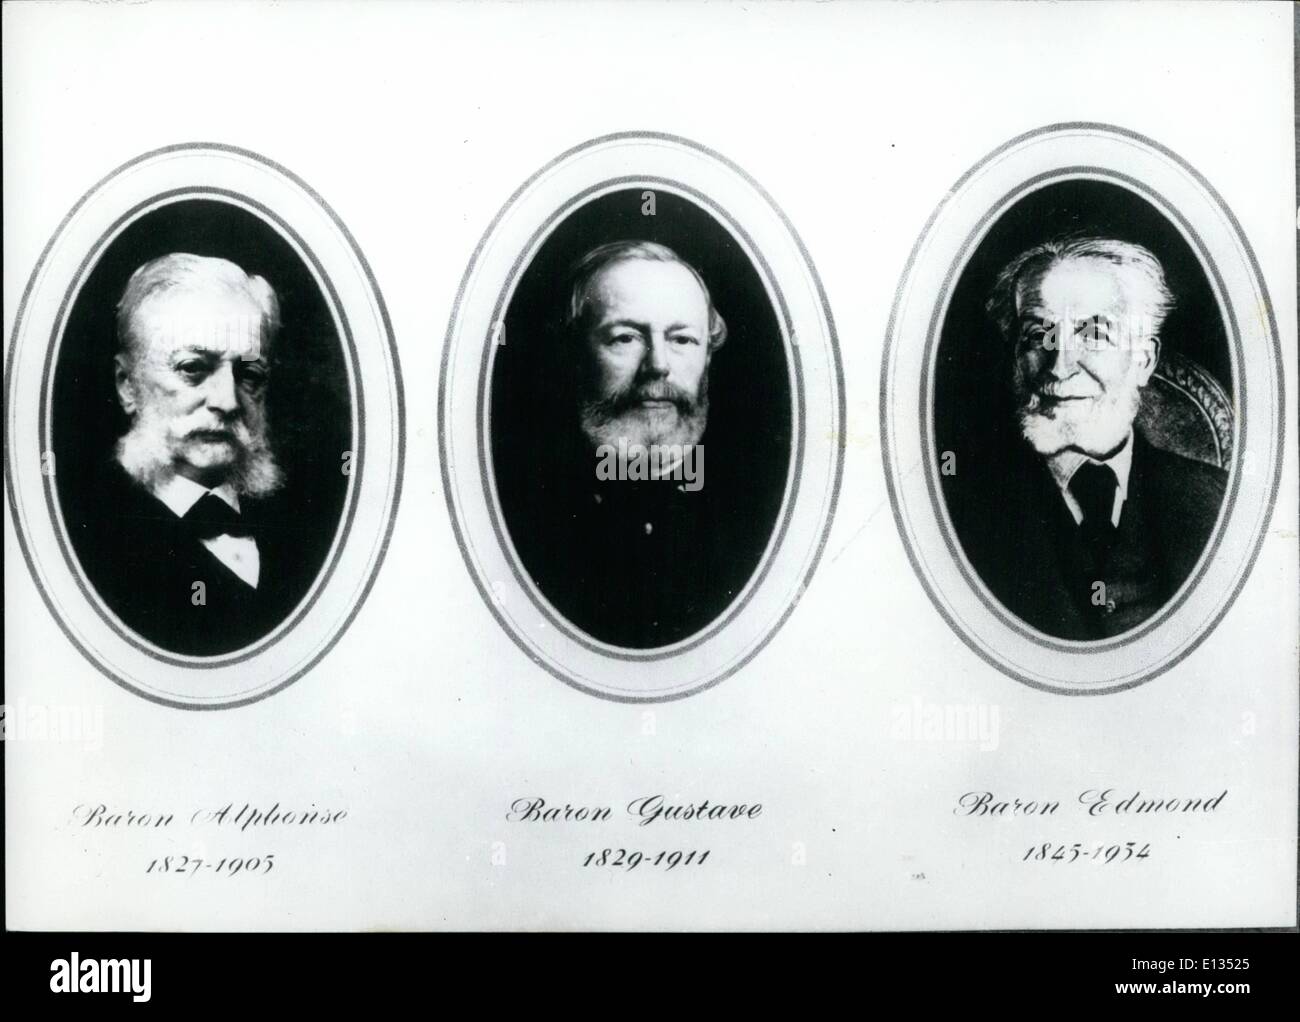 Feb. 26, 2012 - The banking dynasty of the Rothschild: Barons Alphonse, Gustave and Edmond. Stock Photo